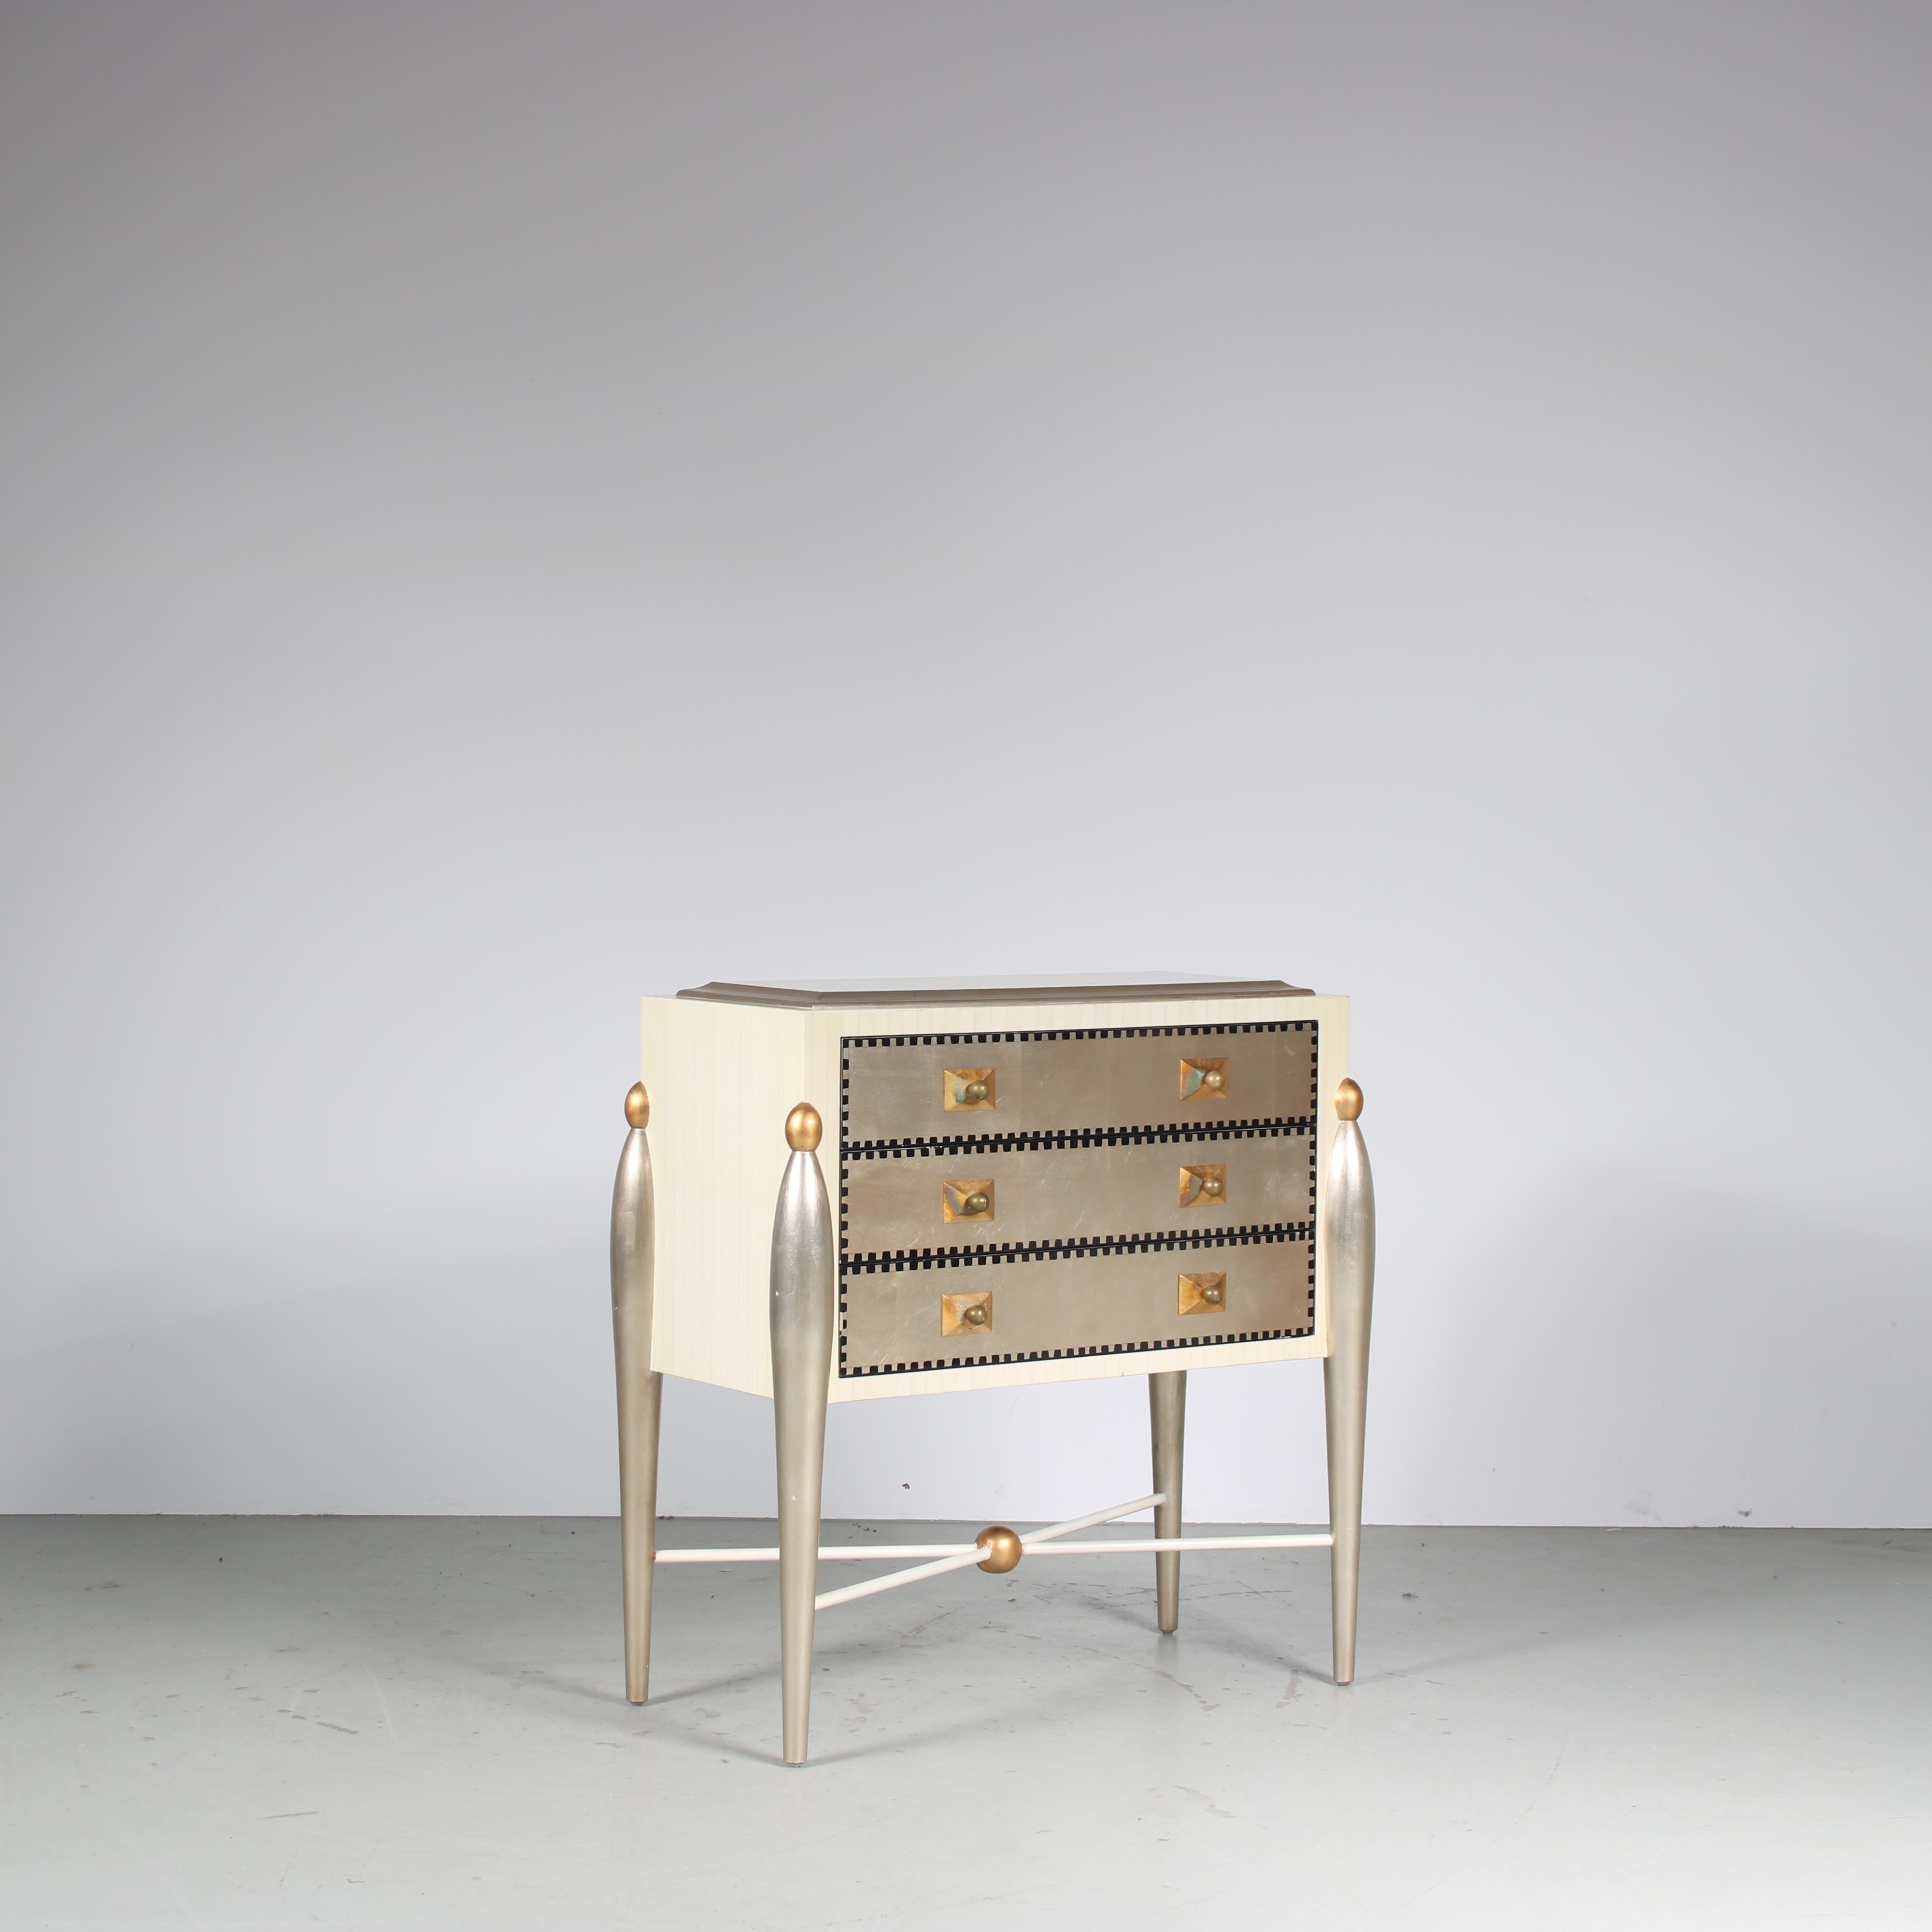 This is a unique drawer cabinet manufactured in Italy around 1970.

The piece is designed with a unique combination of shapes and colours, giving it an eye-catching style that reminds of the Memphis movement that explored the borders of design.